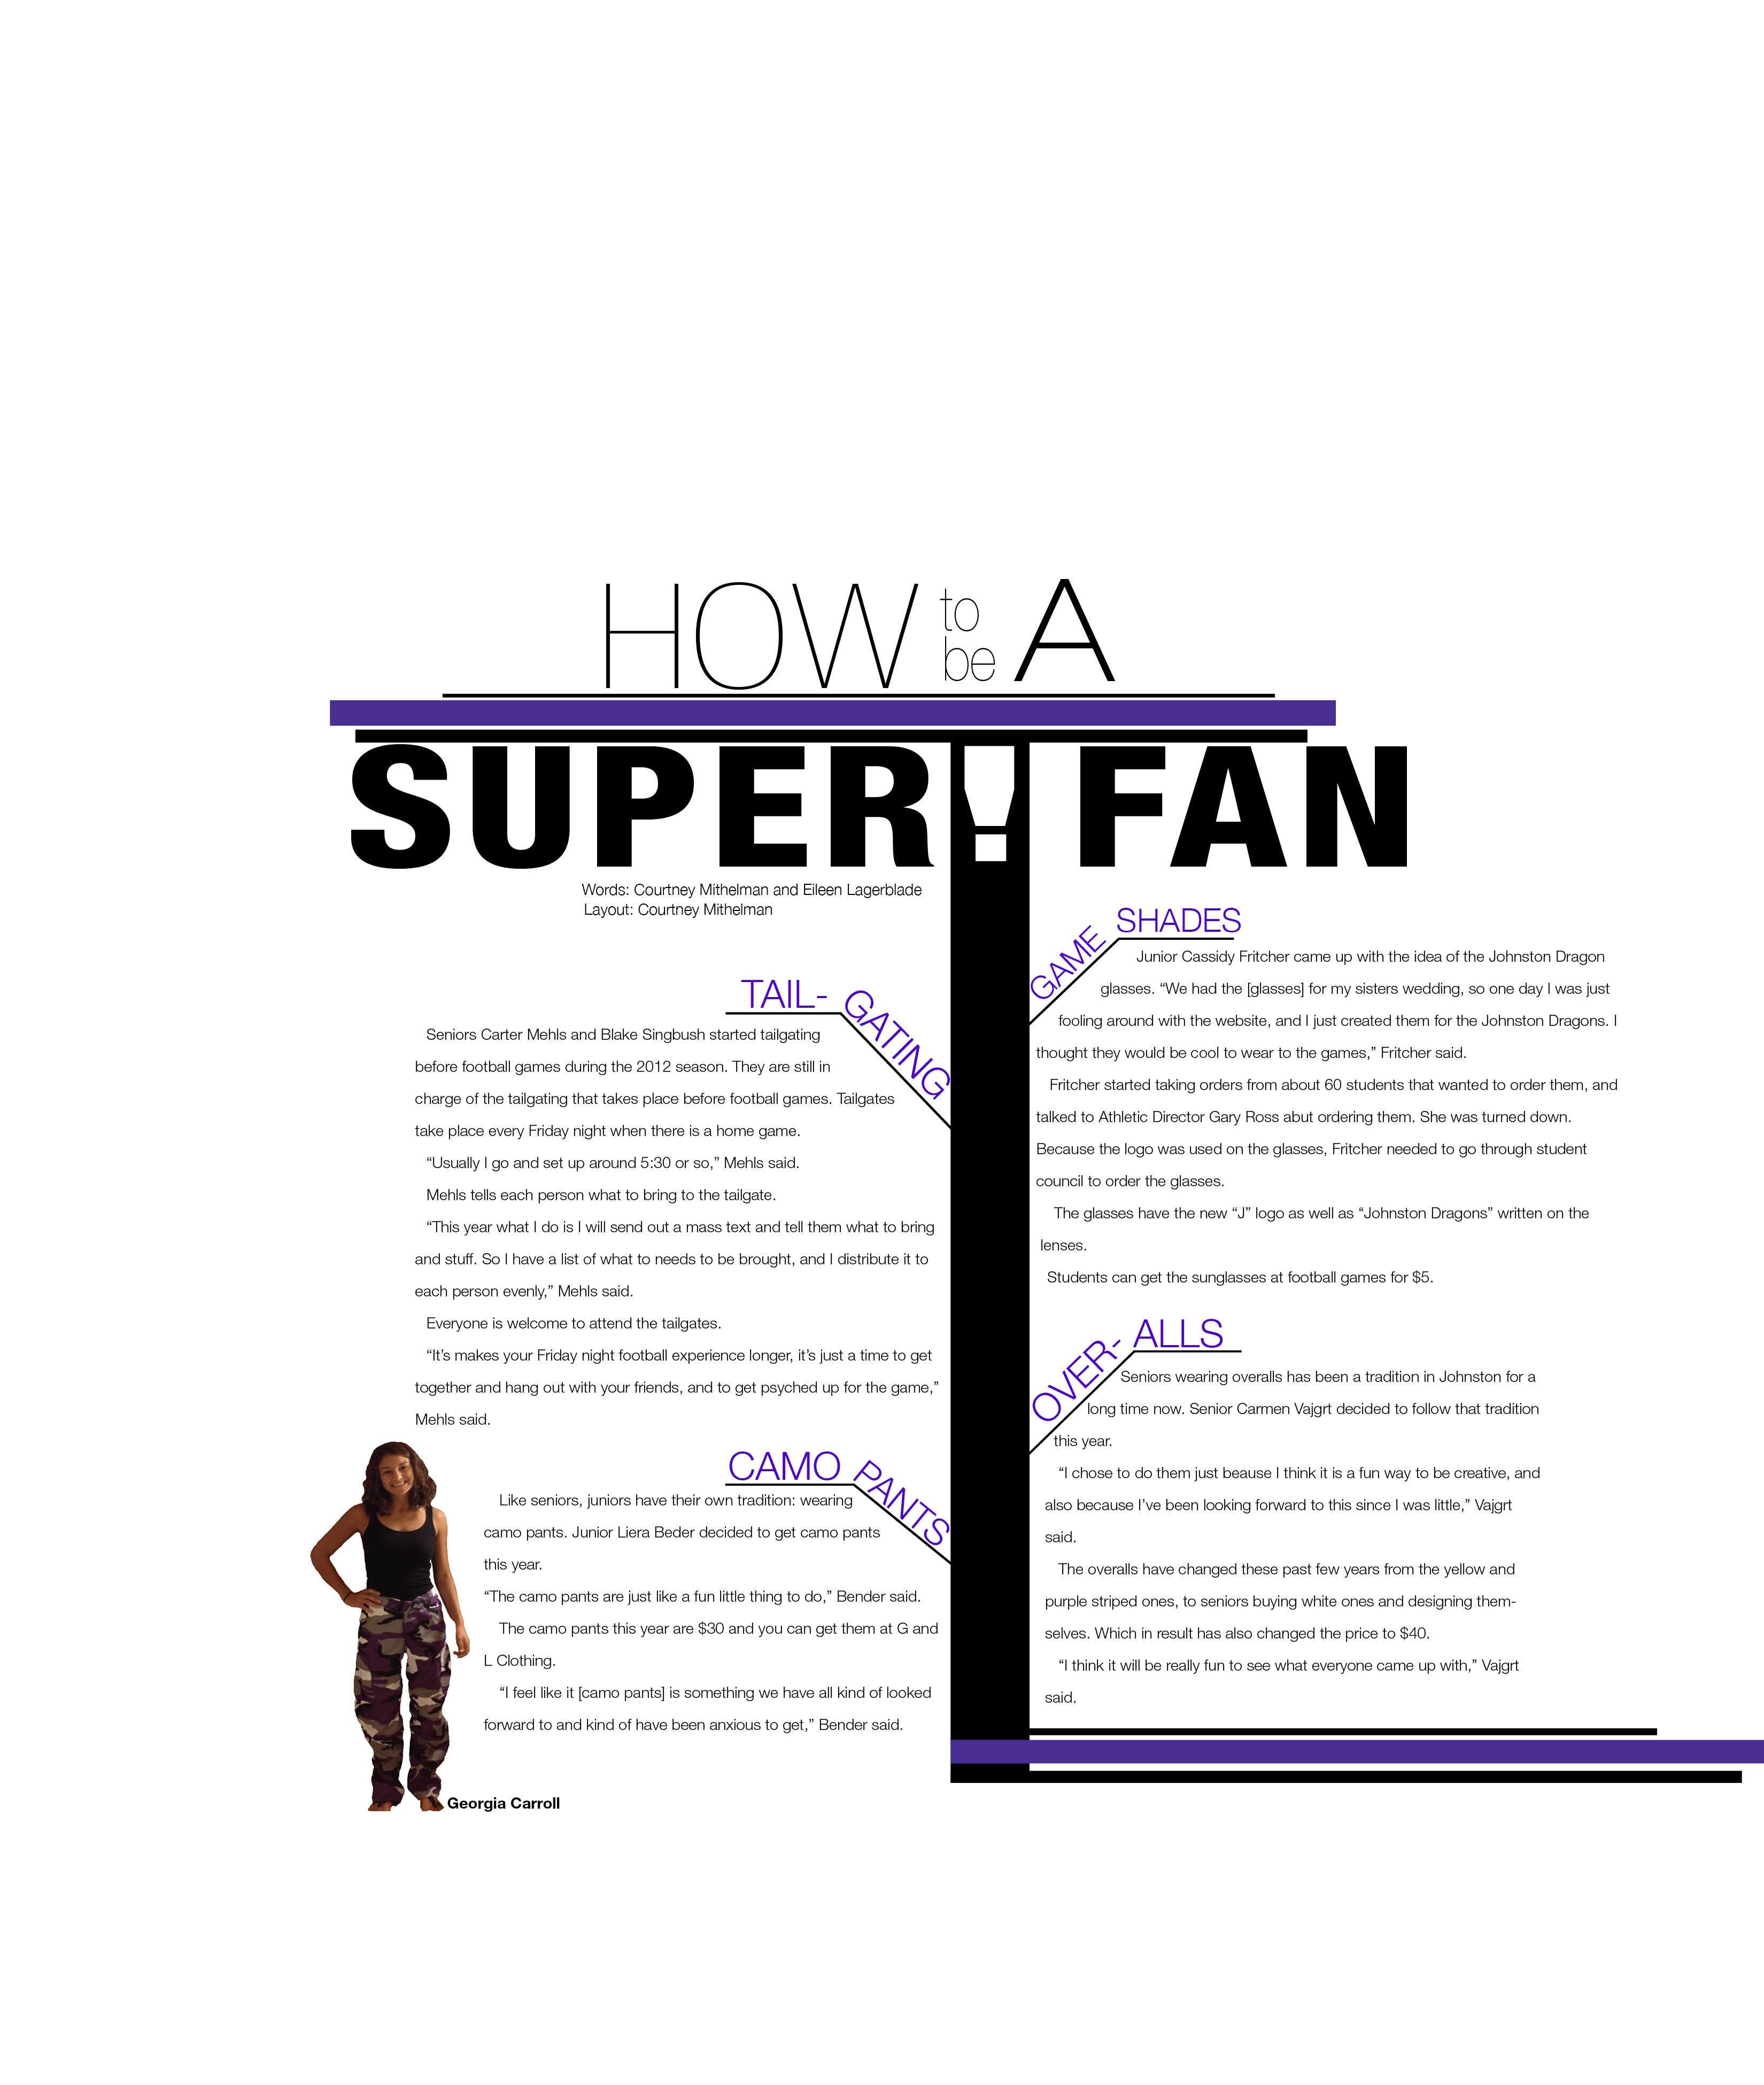 How to be a Superfan